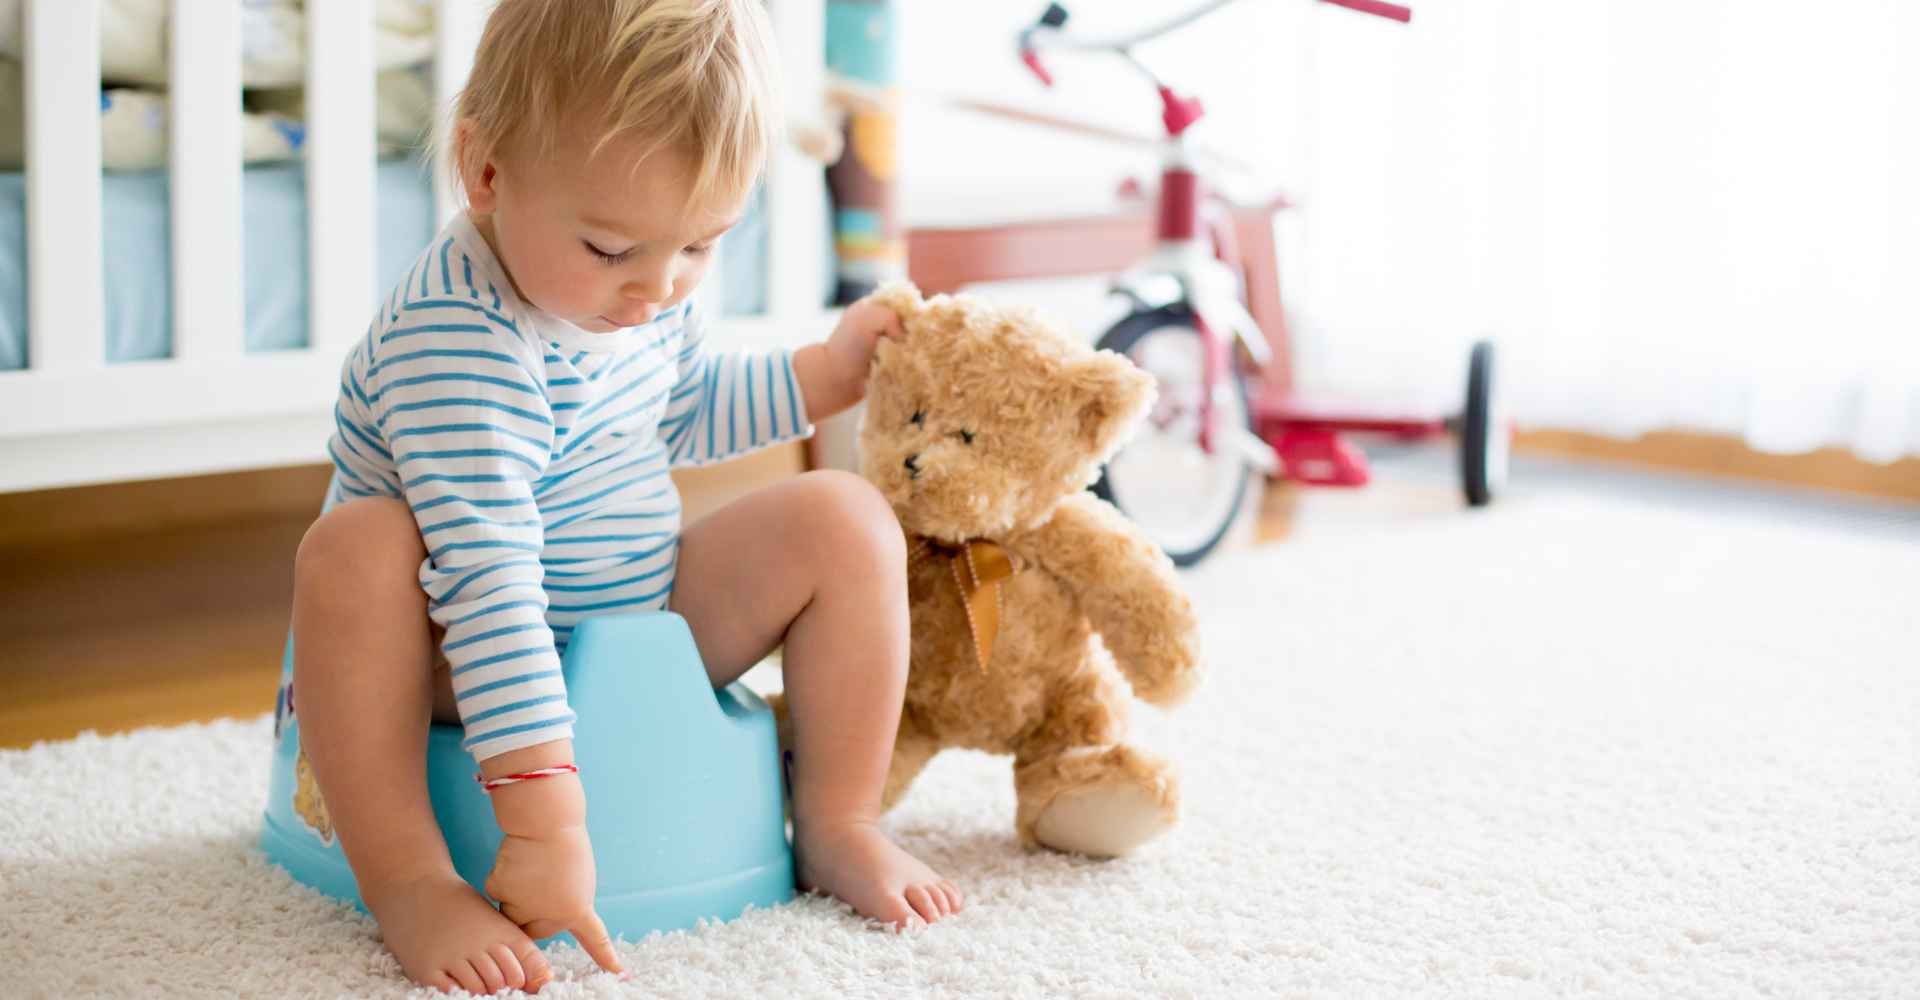 How To Potty Train Your Child: Tips For Parents